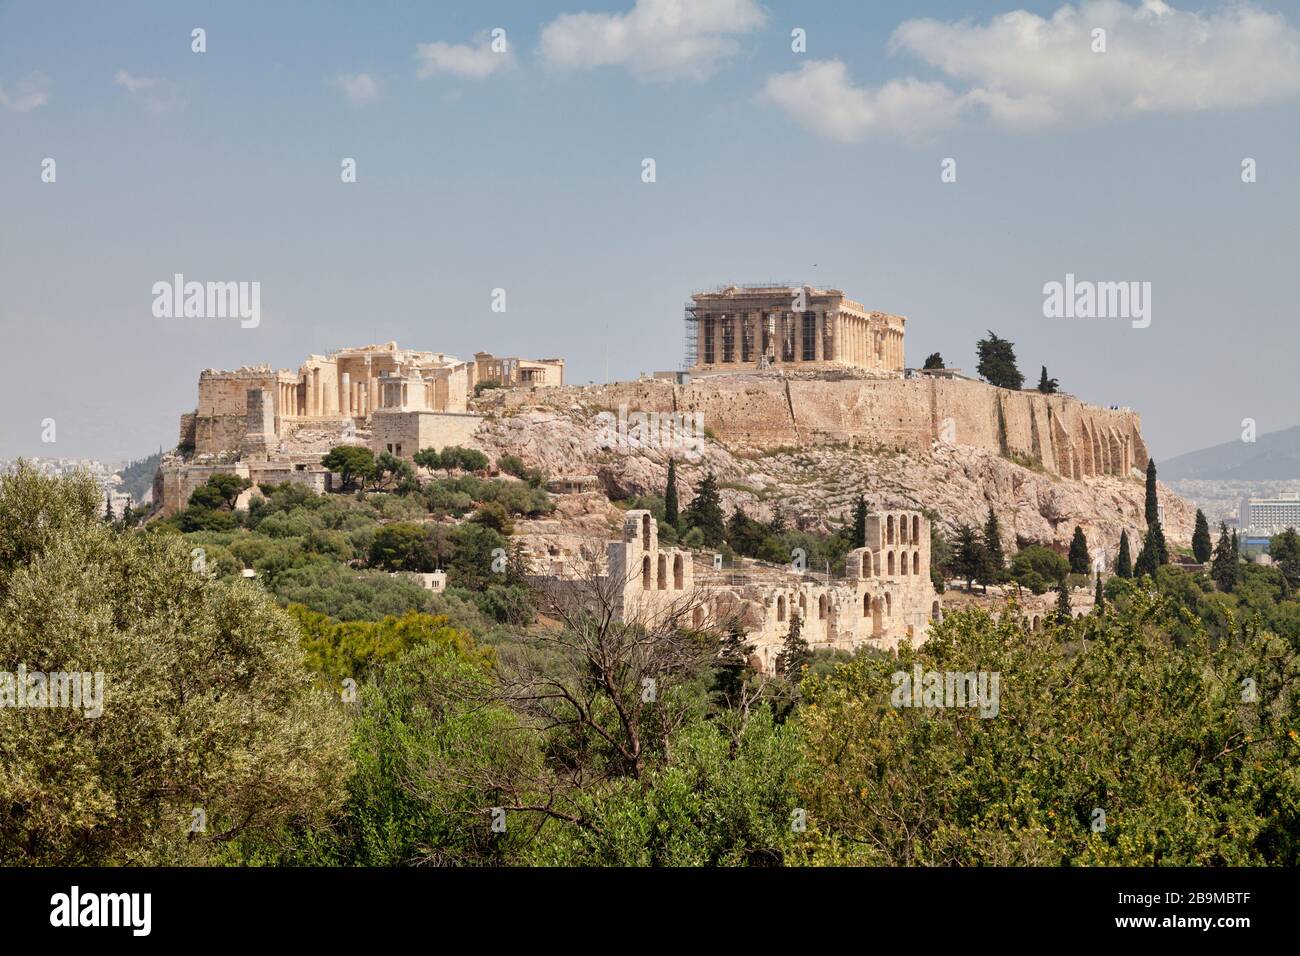 The Acropolis of Athens is an ancient citadel located on a rocky outcrop above the city which contains the ruins of many ancient buildings. Stock Photo